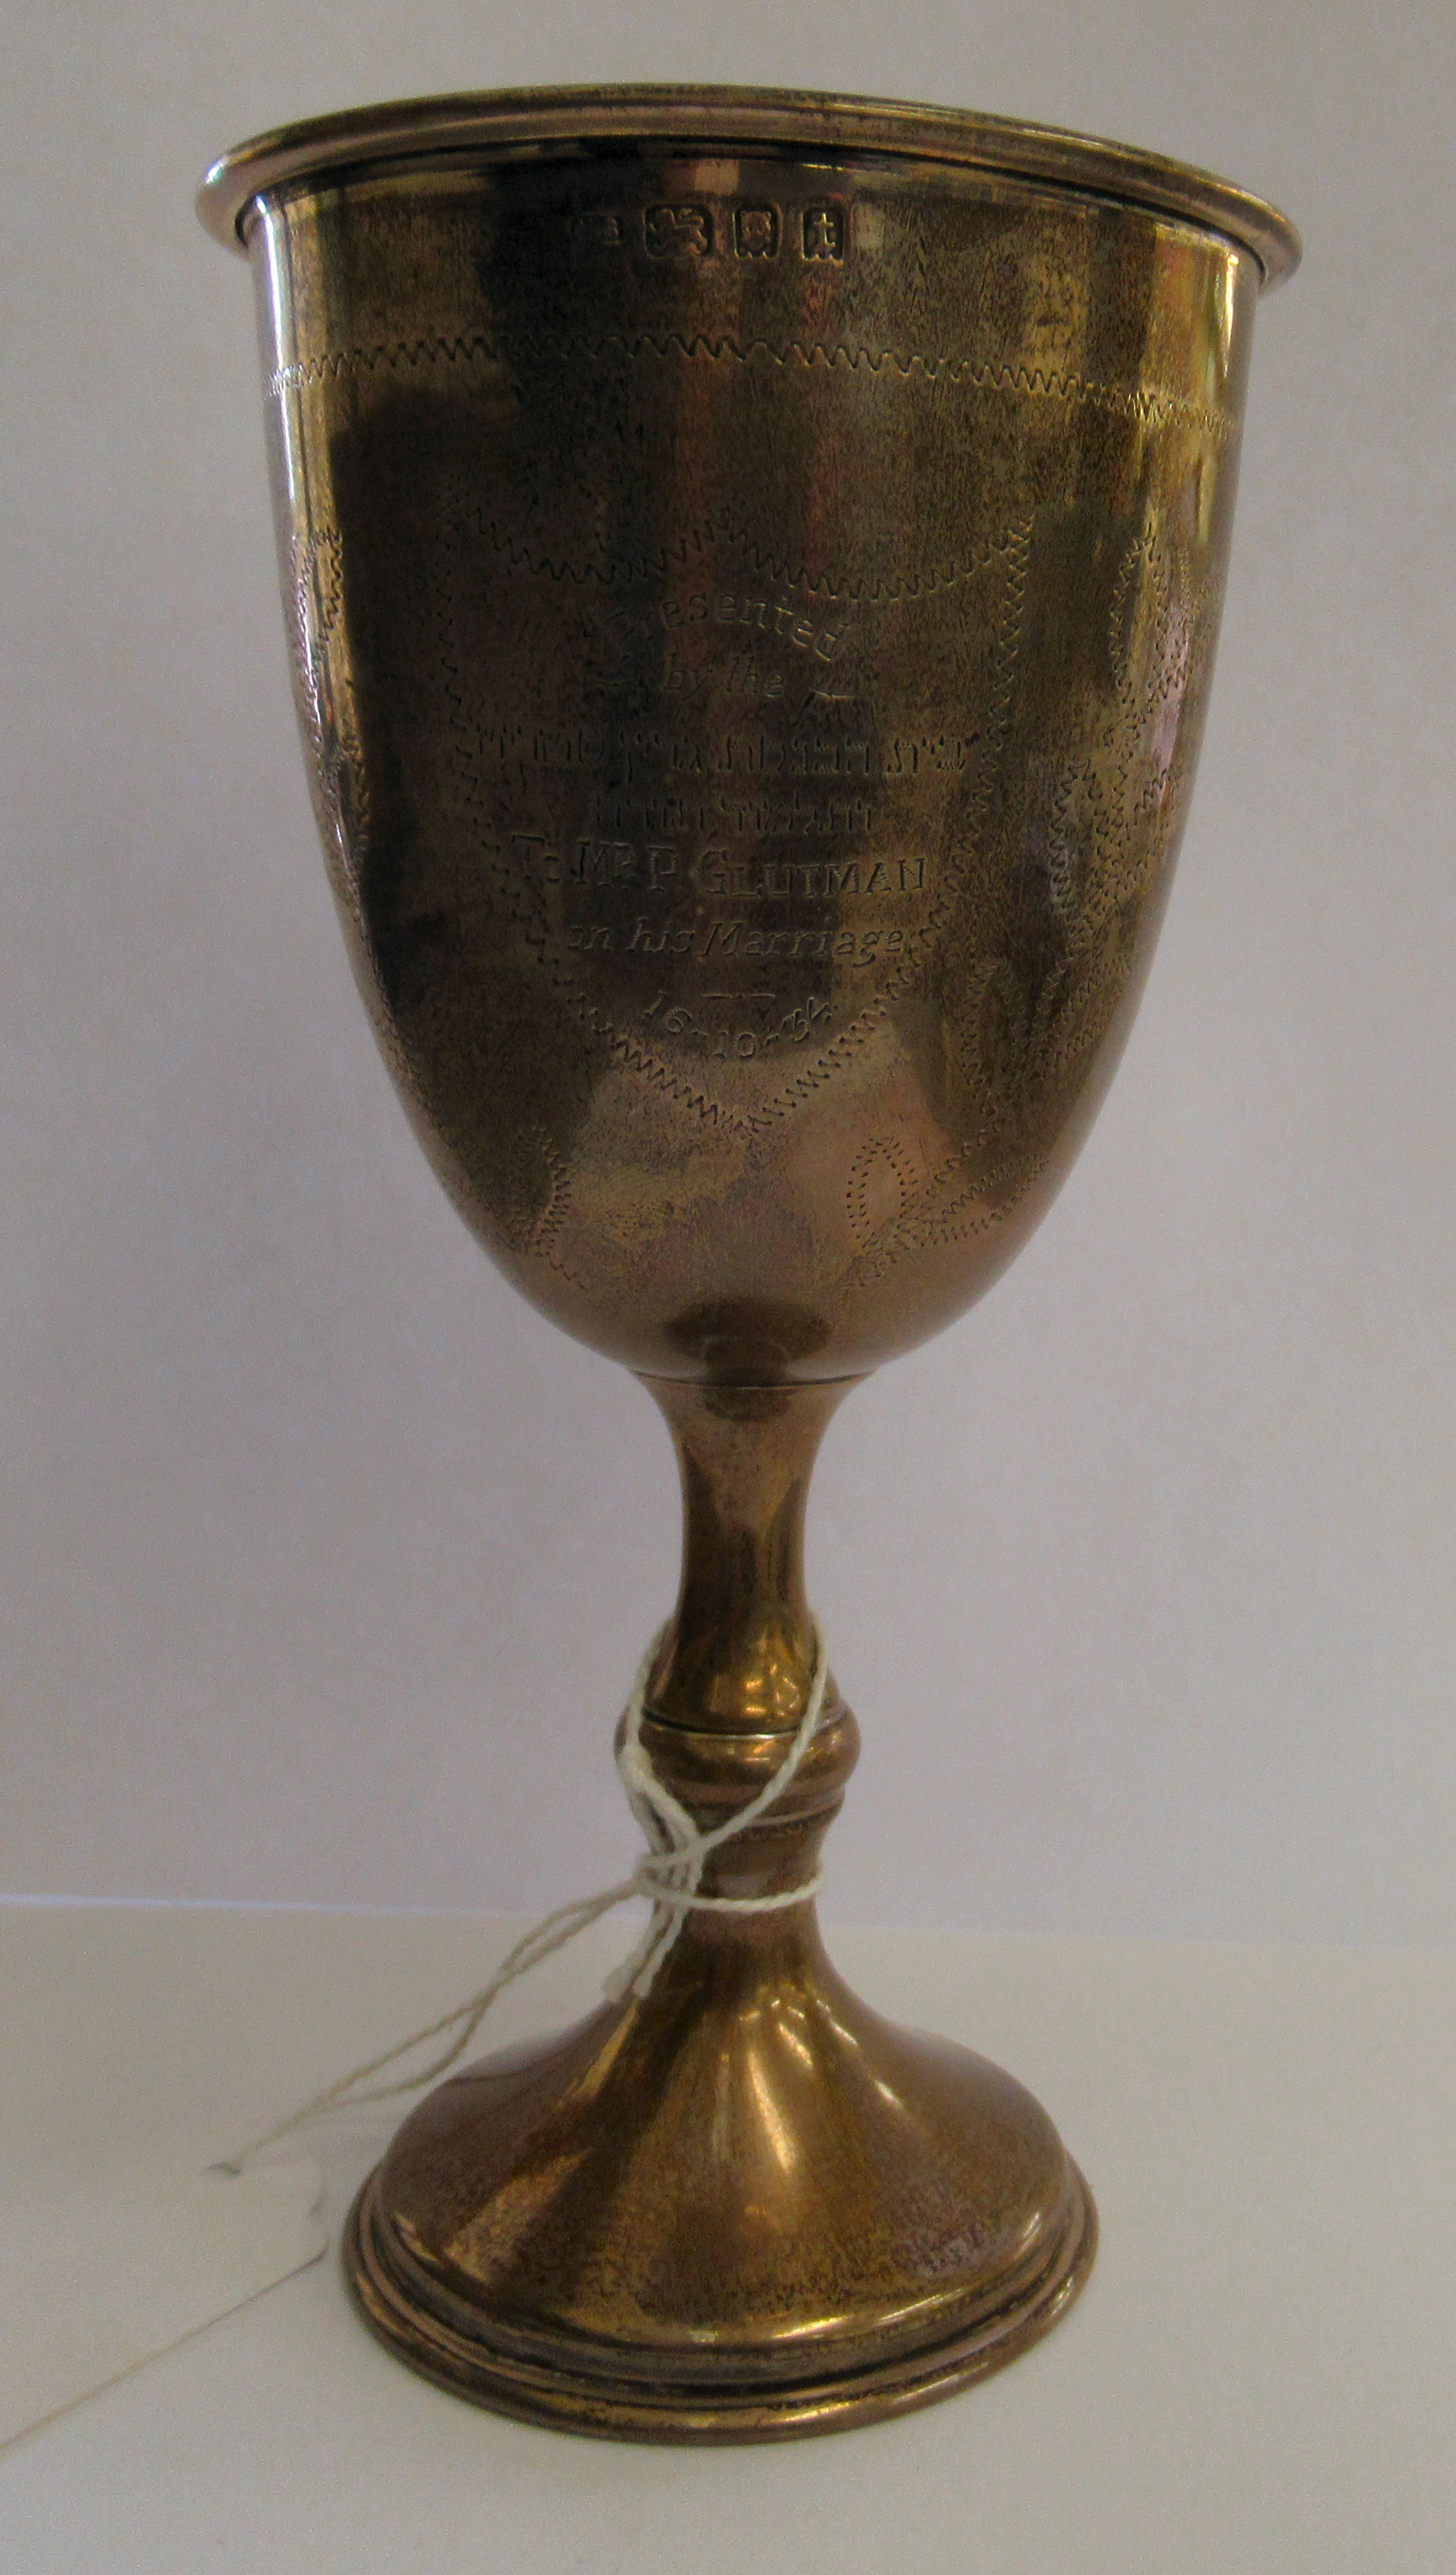 A silver pedestal cup, presented to Mr P Glutman on his Marriage 16.10.